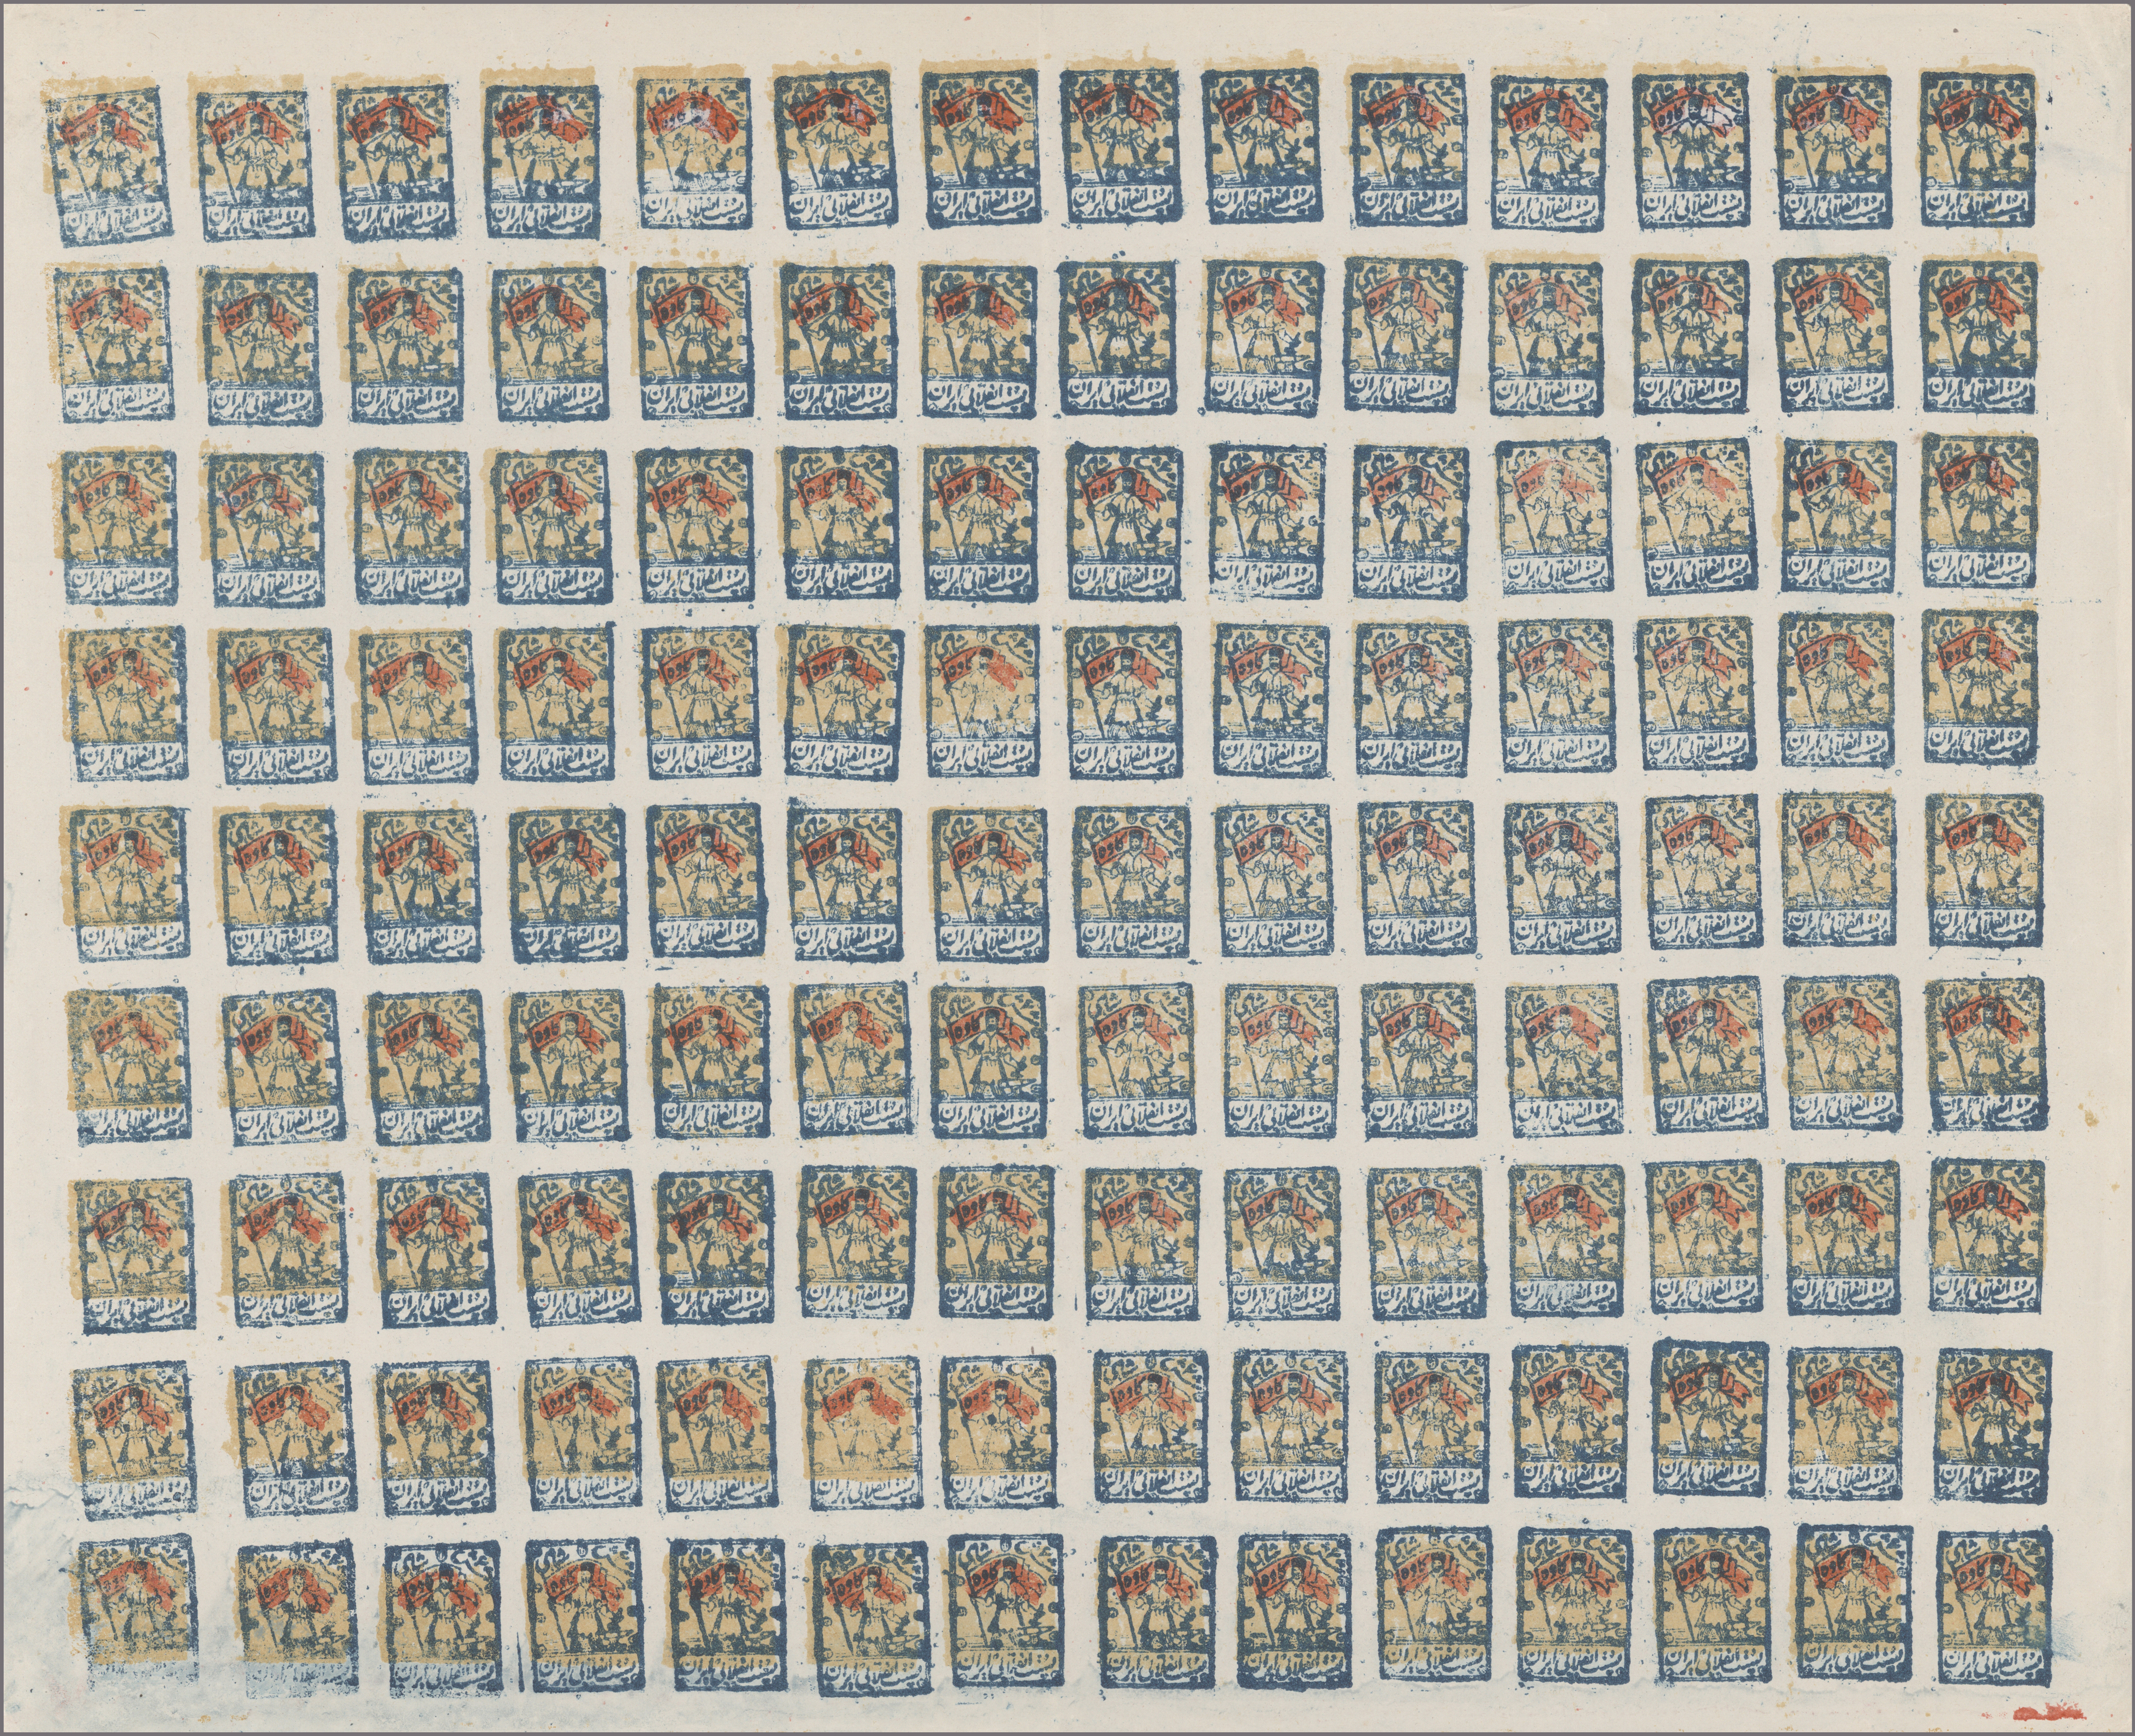 Lot 02240 - iran  -  Auktionshaus Christoph Gärtner GmbH & Co. KG 55th AUCTION - Day 2